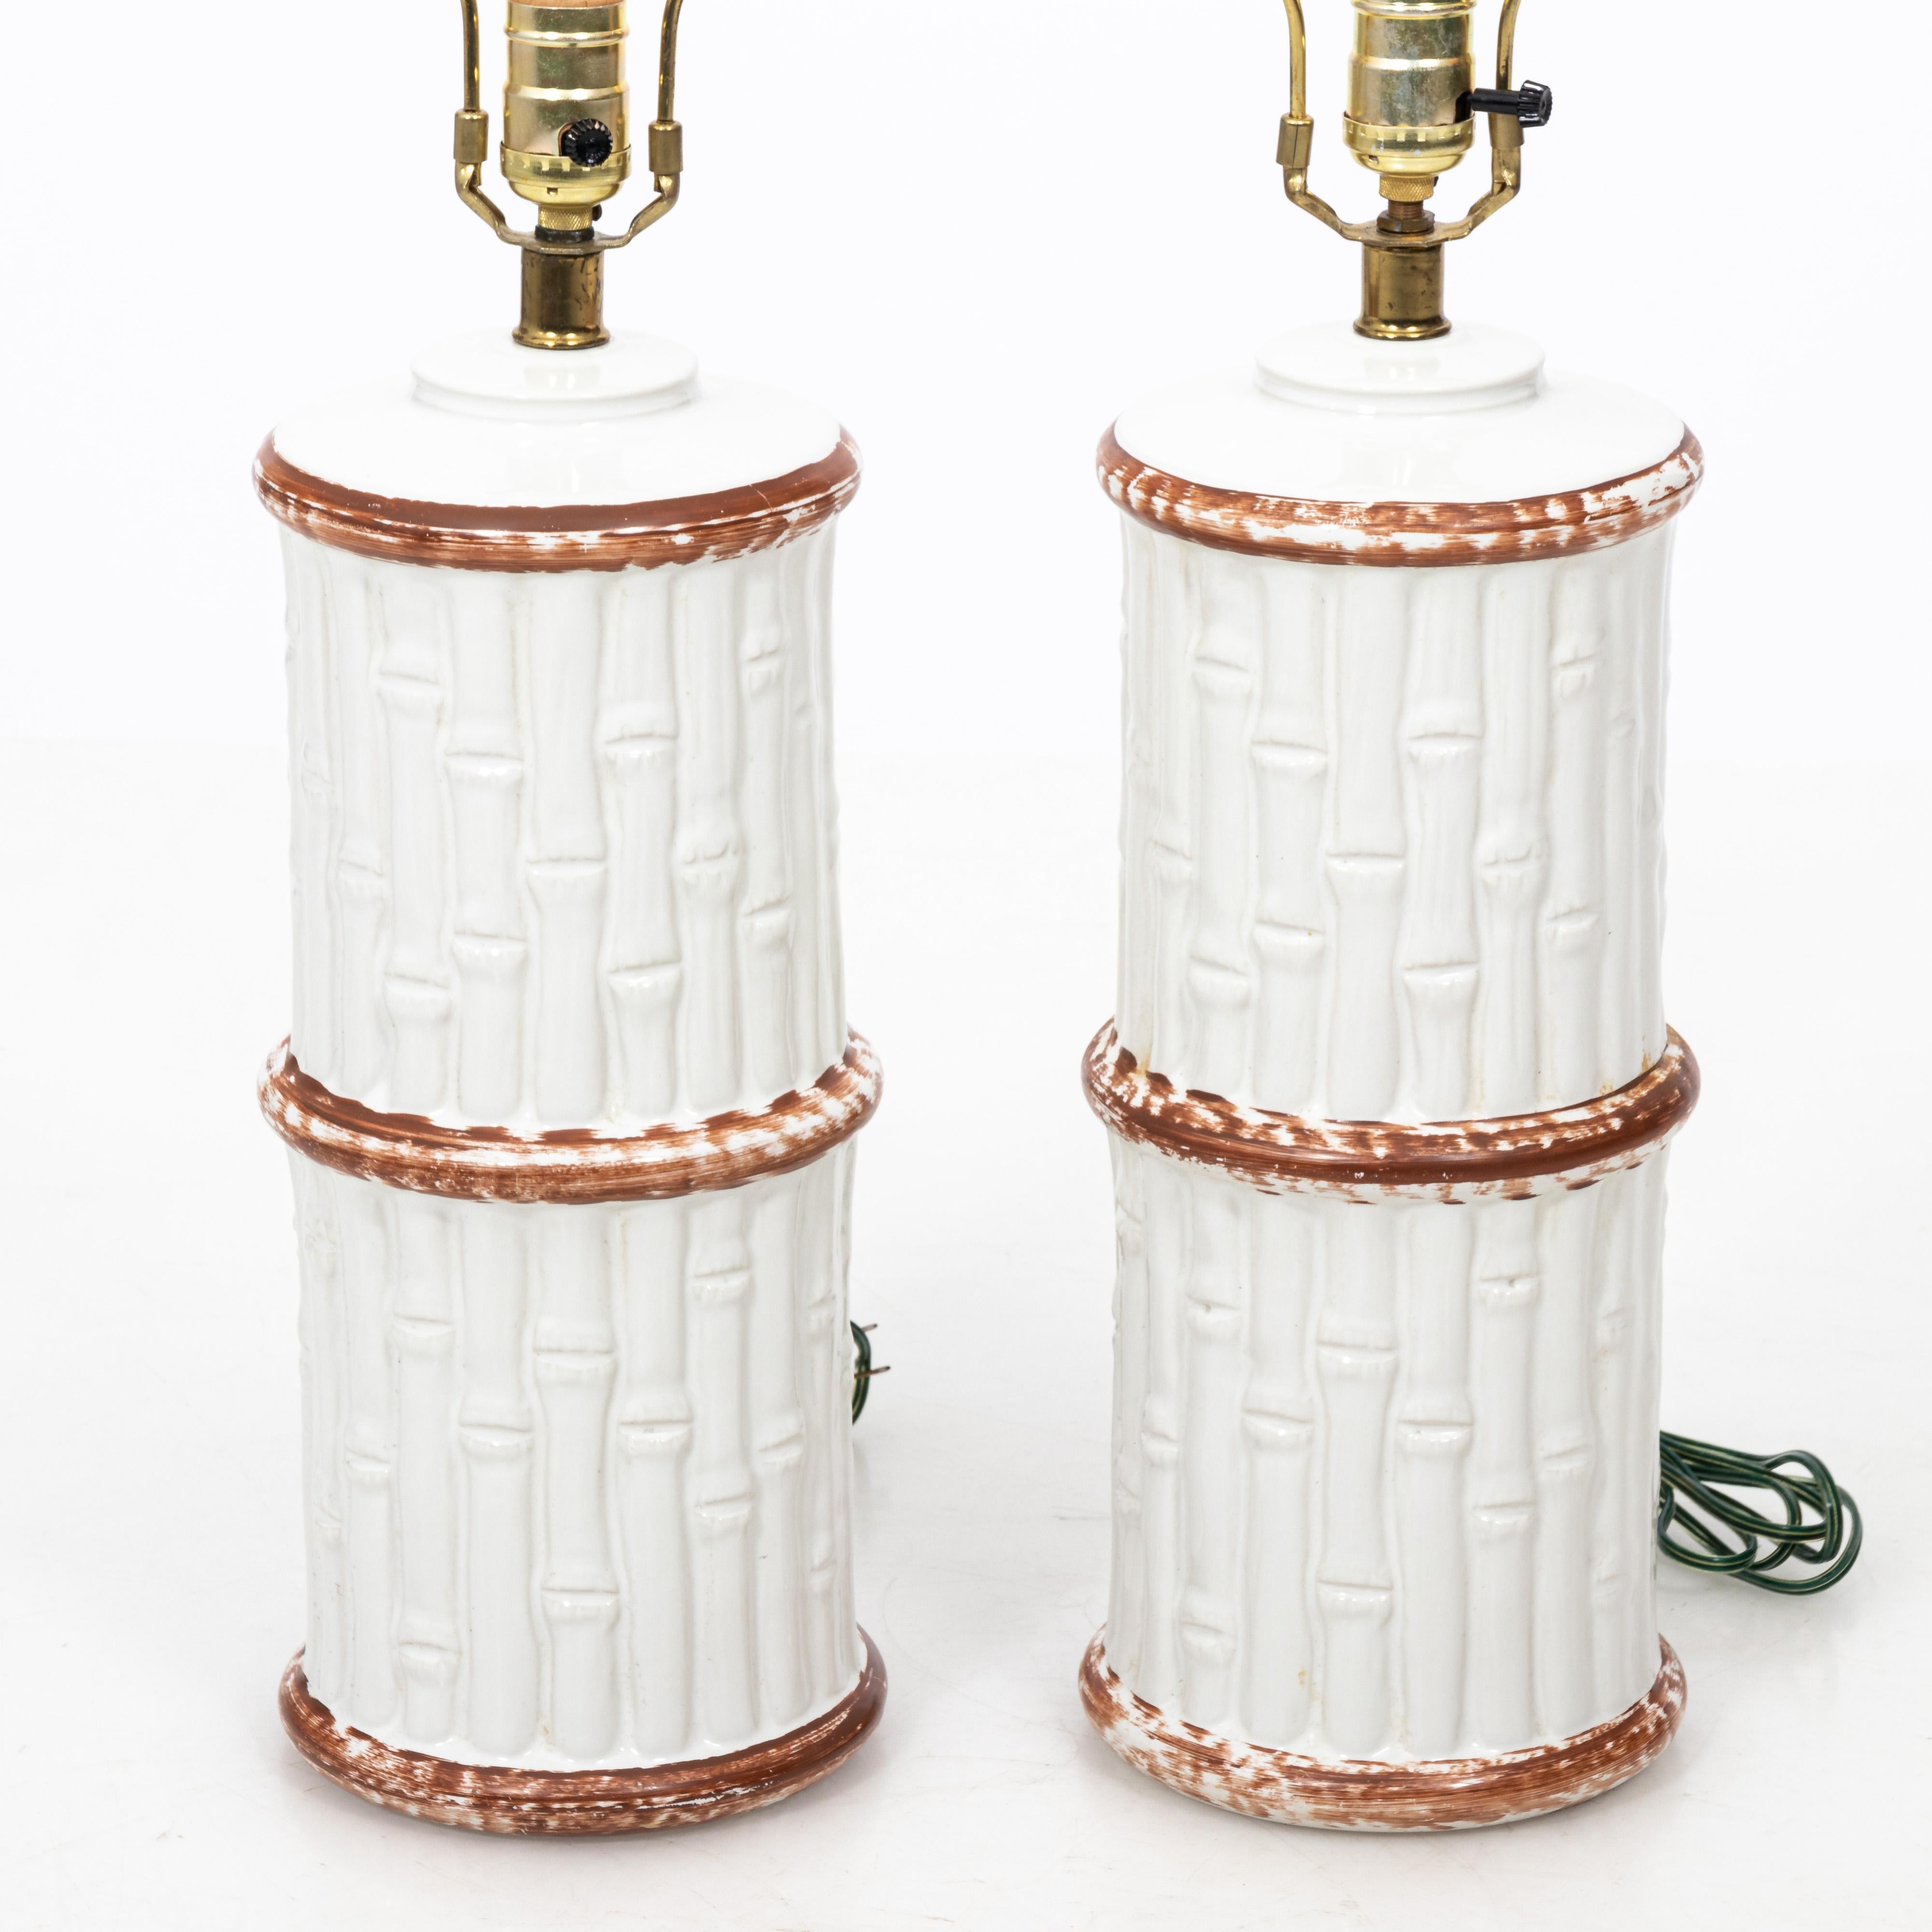 Pair of painted ceramic faux bamboo table lamps with harps, circa 1970s.